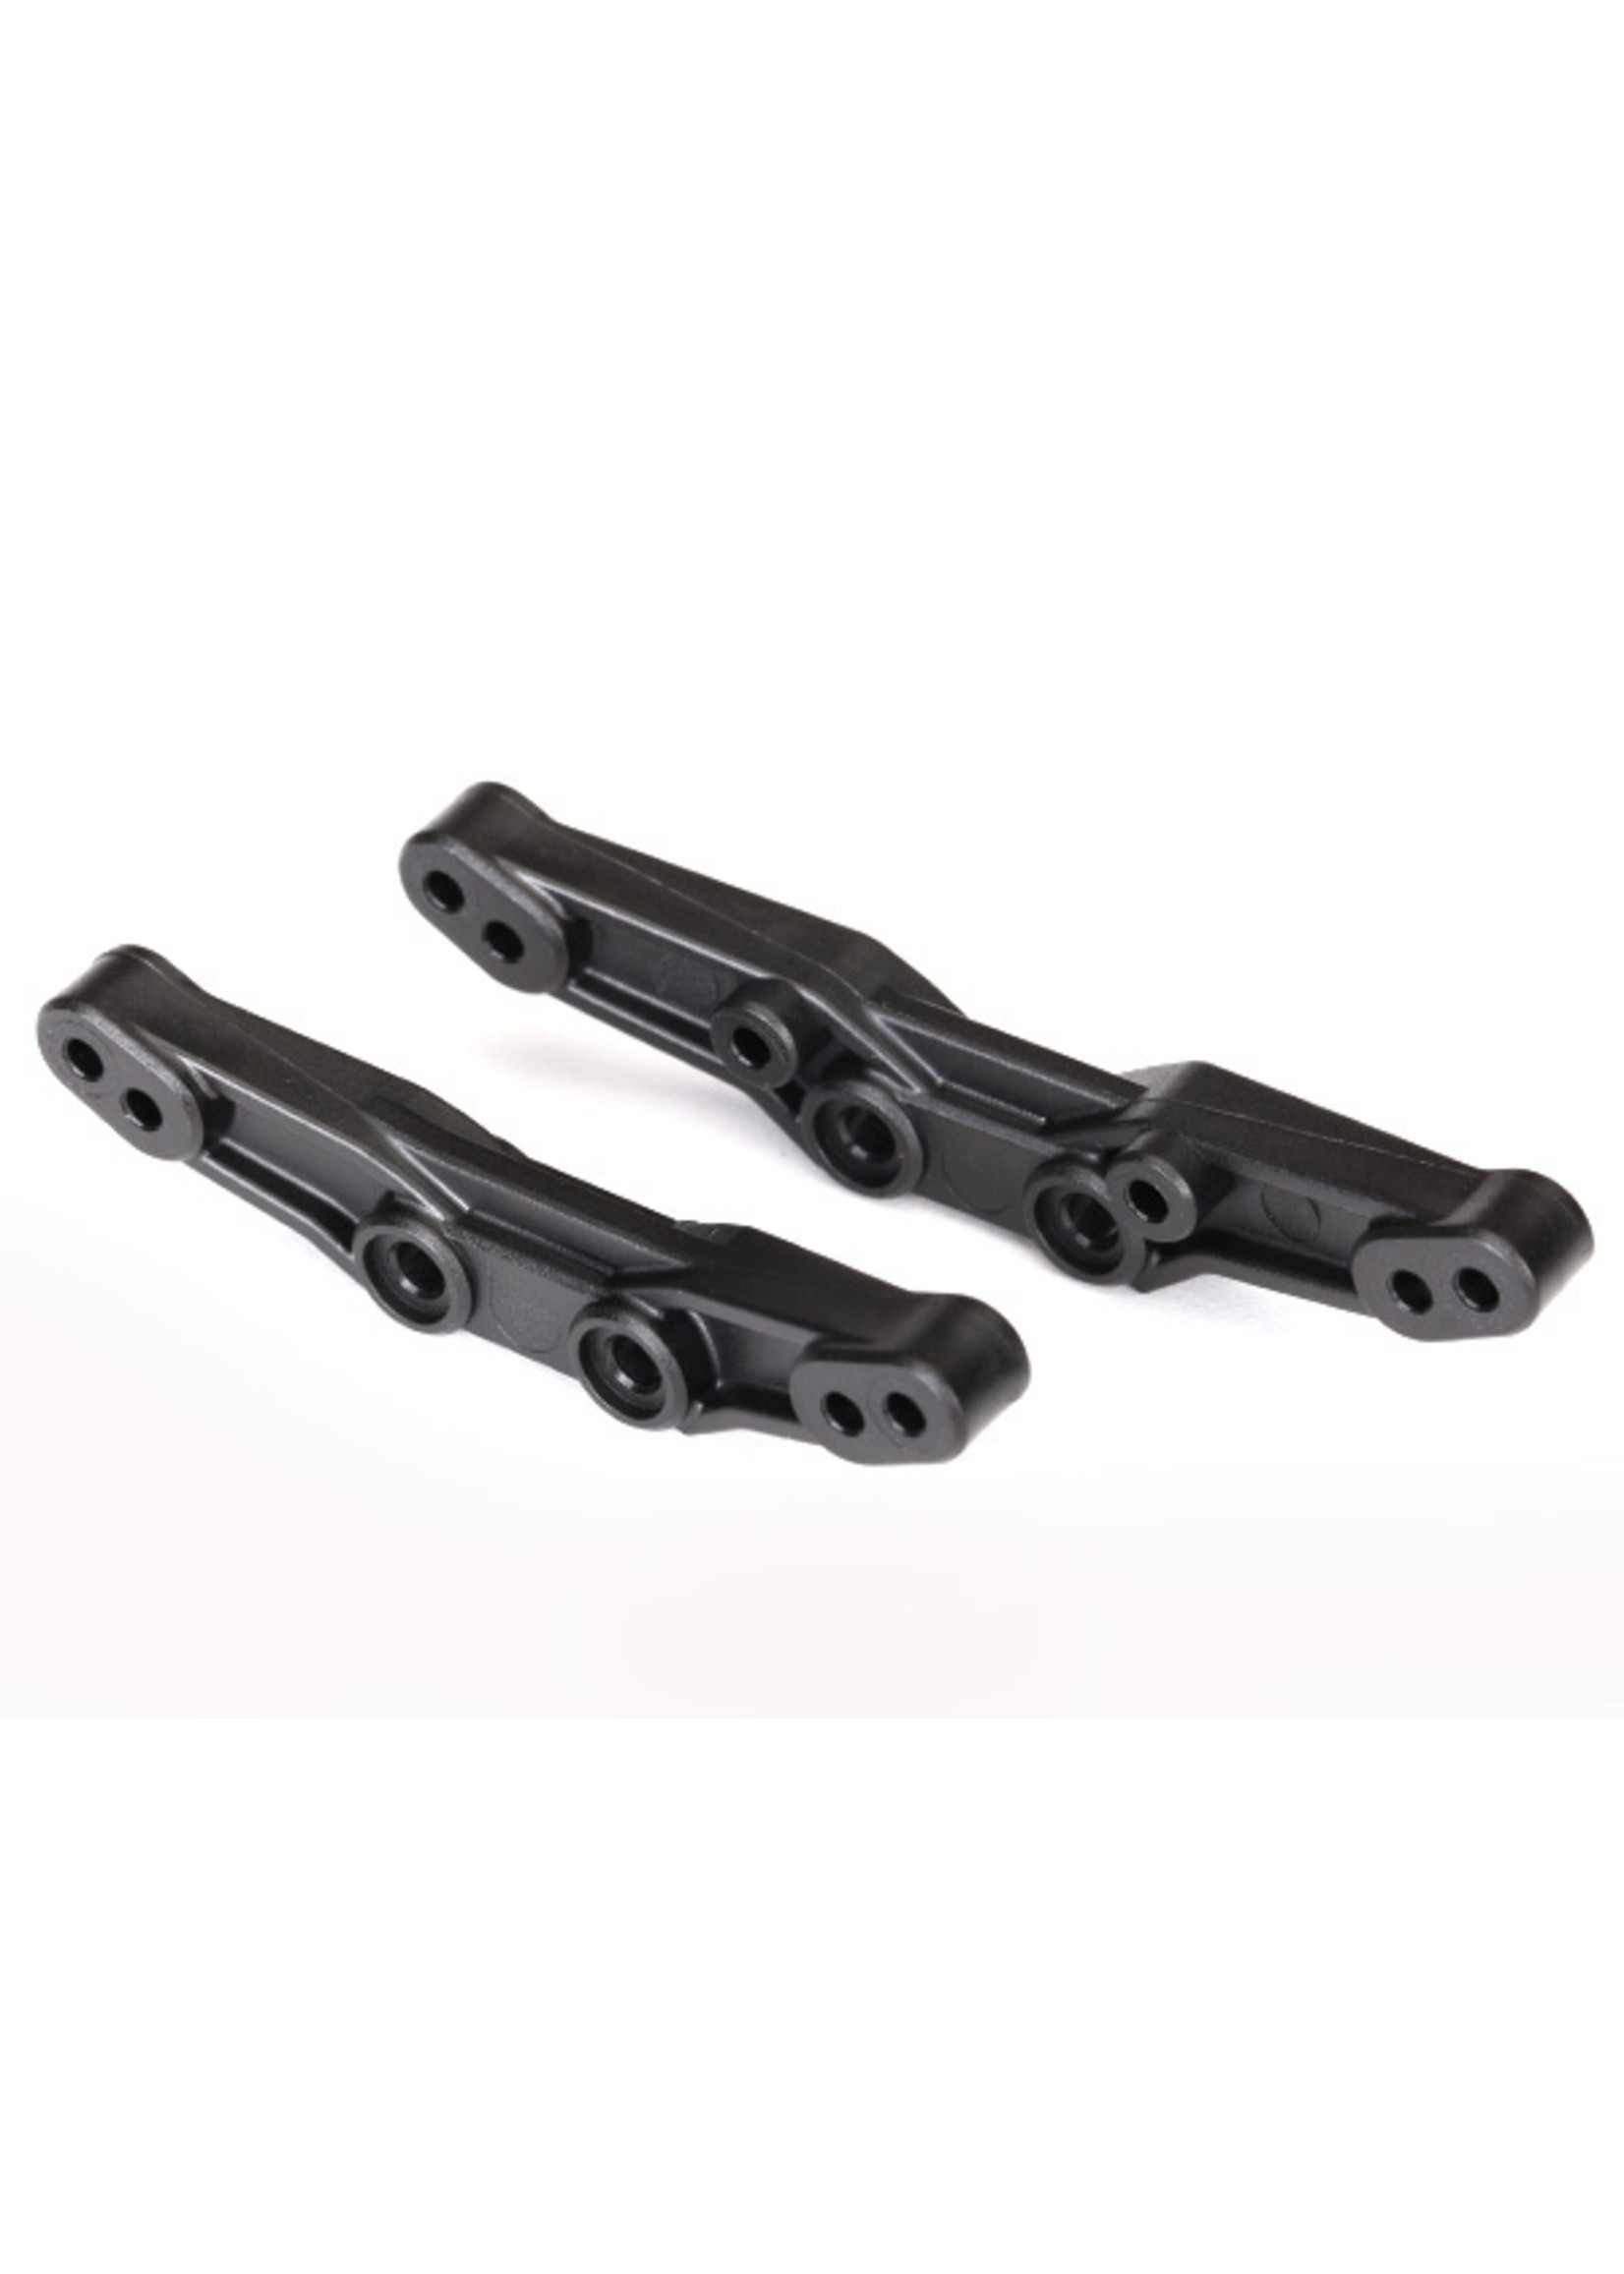 Traxxas 8338 - Shock Towers, Front & Rear